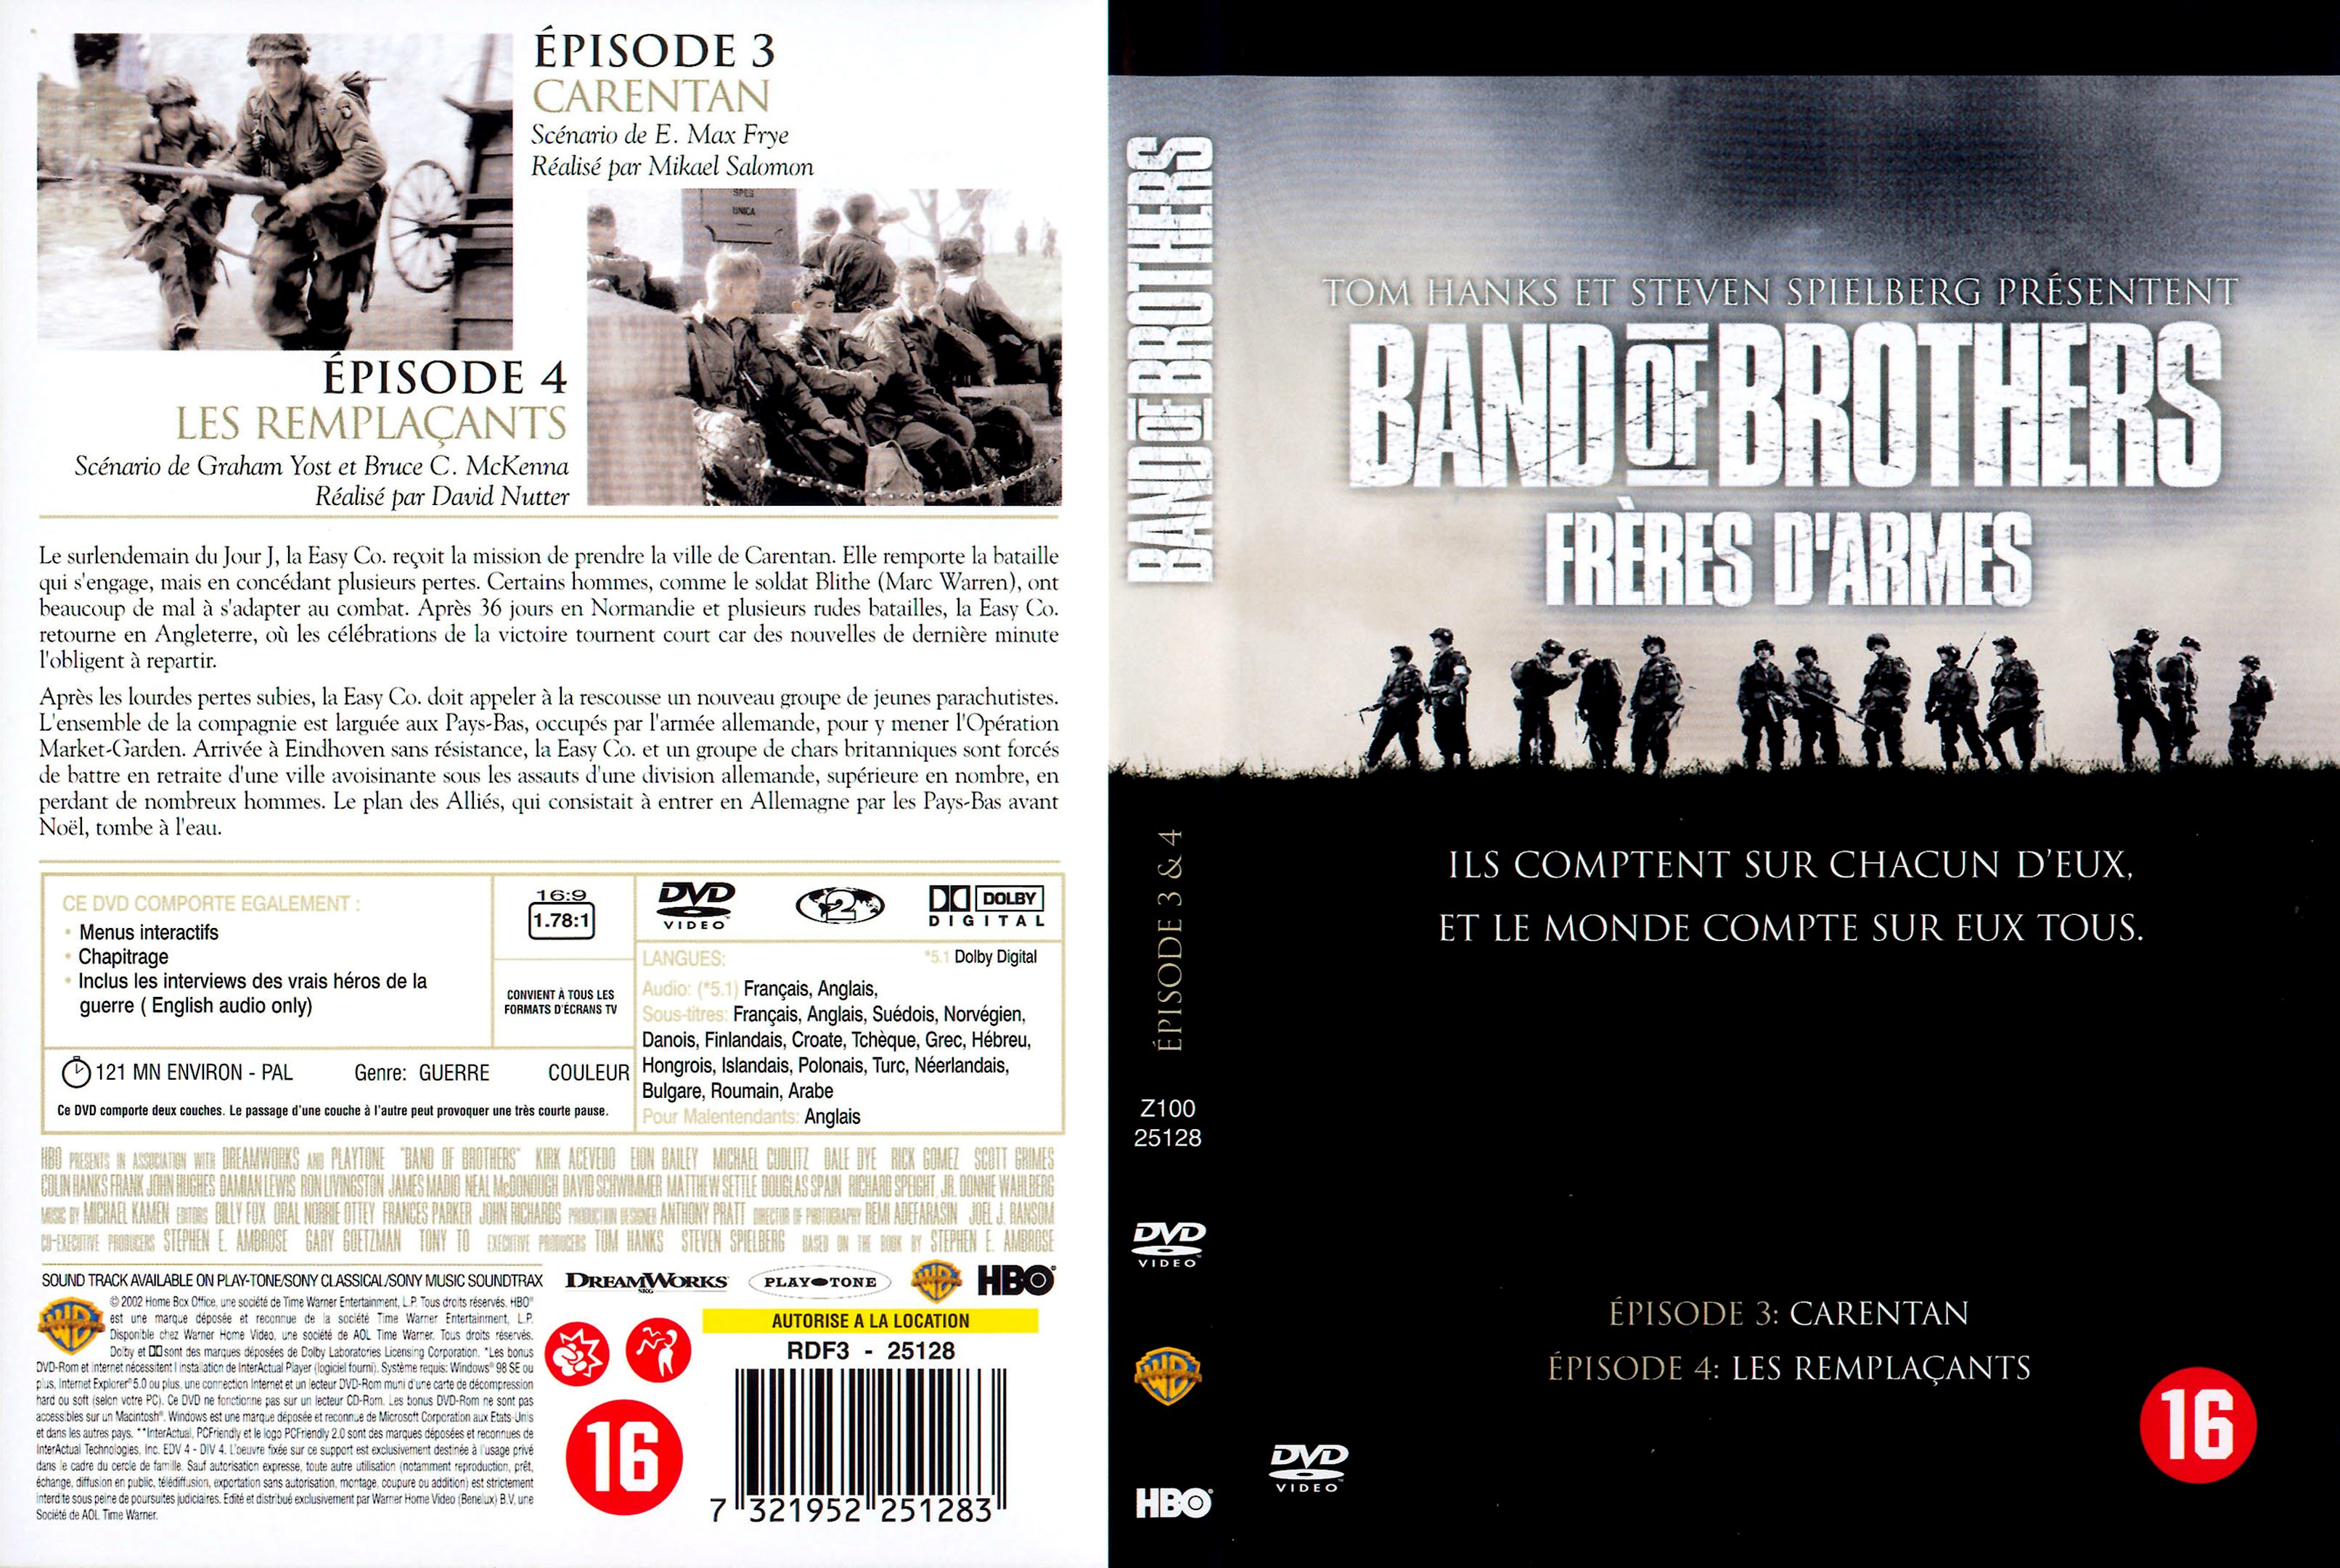 Jaquette DVD Band of brothers vol 2